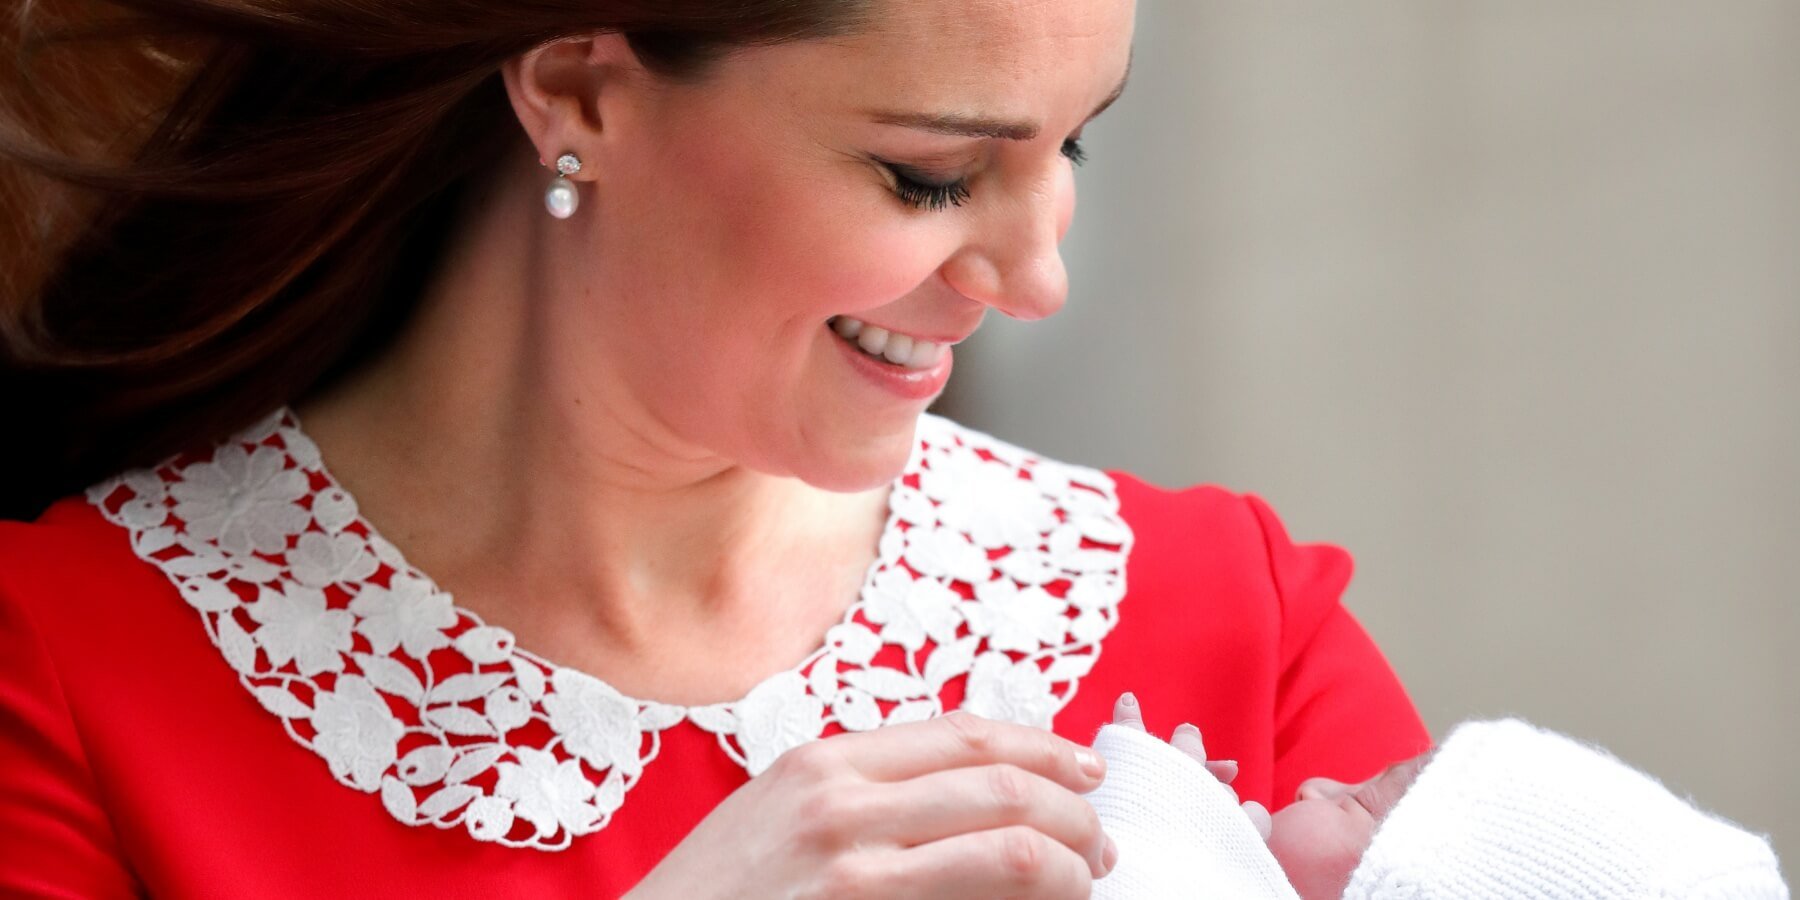 Kate Middleton wears a Jenny Packham dress to present Prince Louis to the world.